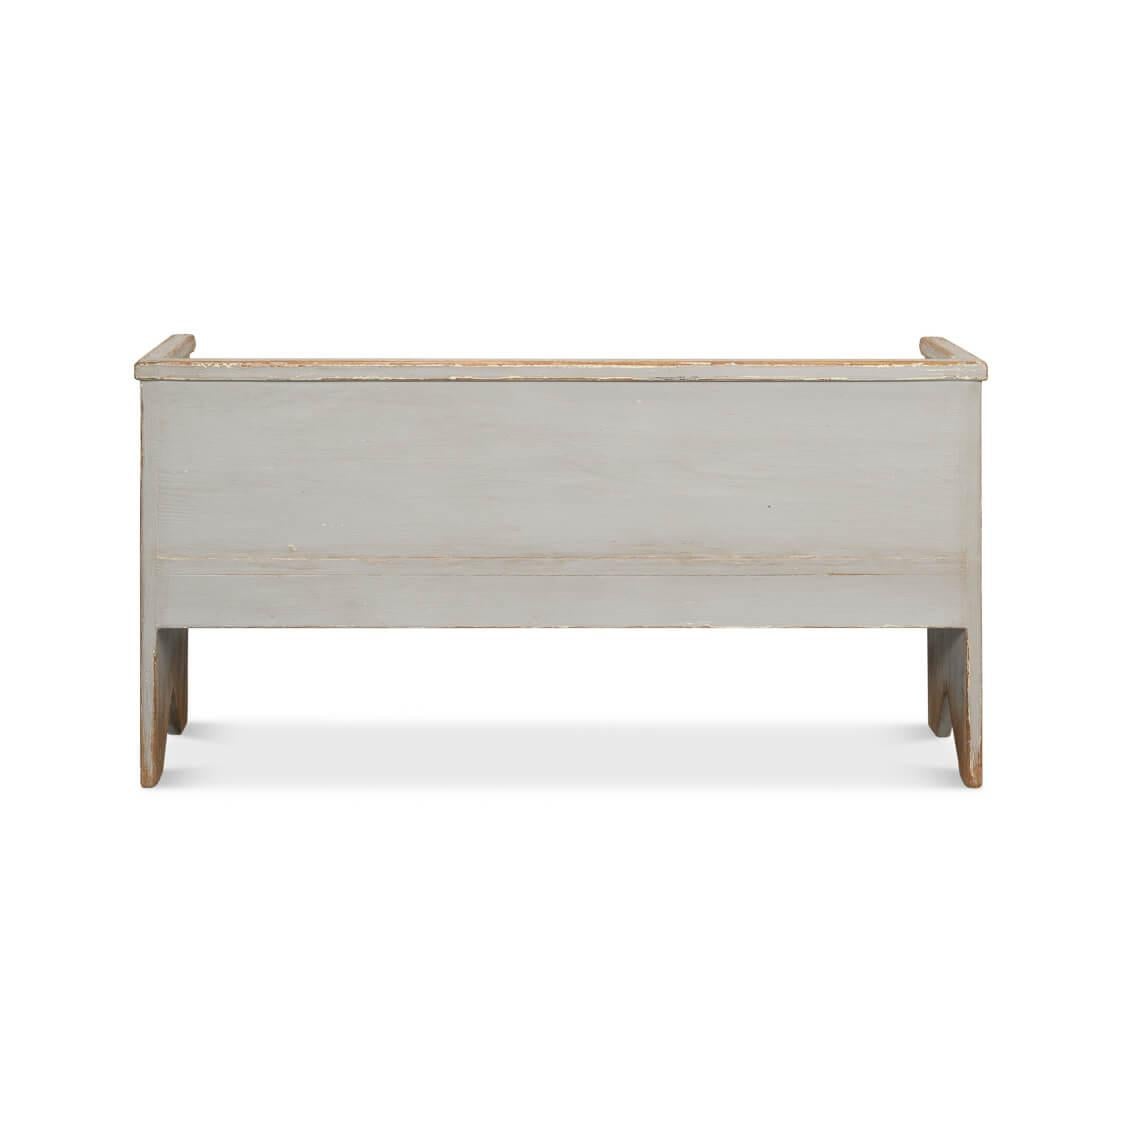 Asian Rustic Gray Painted Bench For Sale